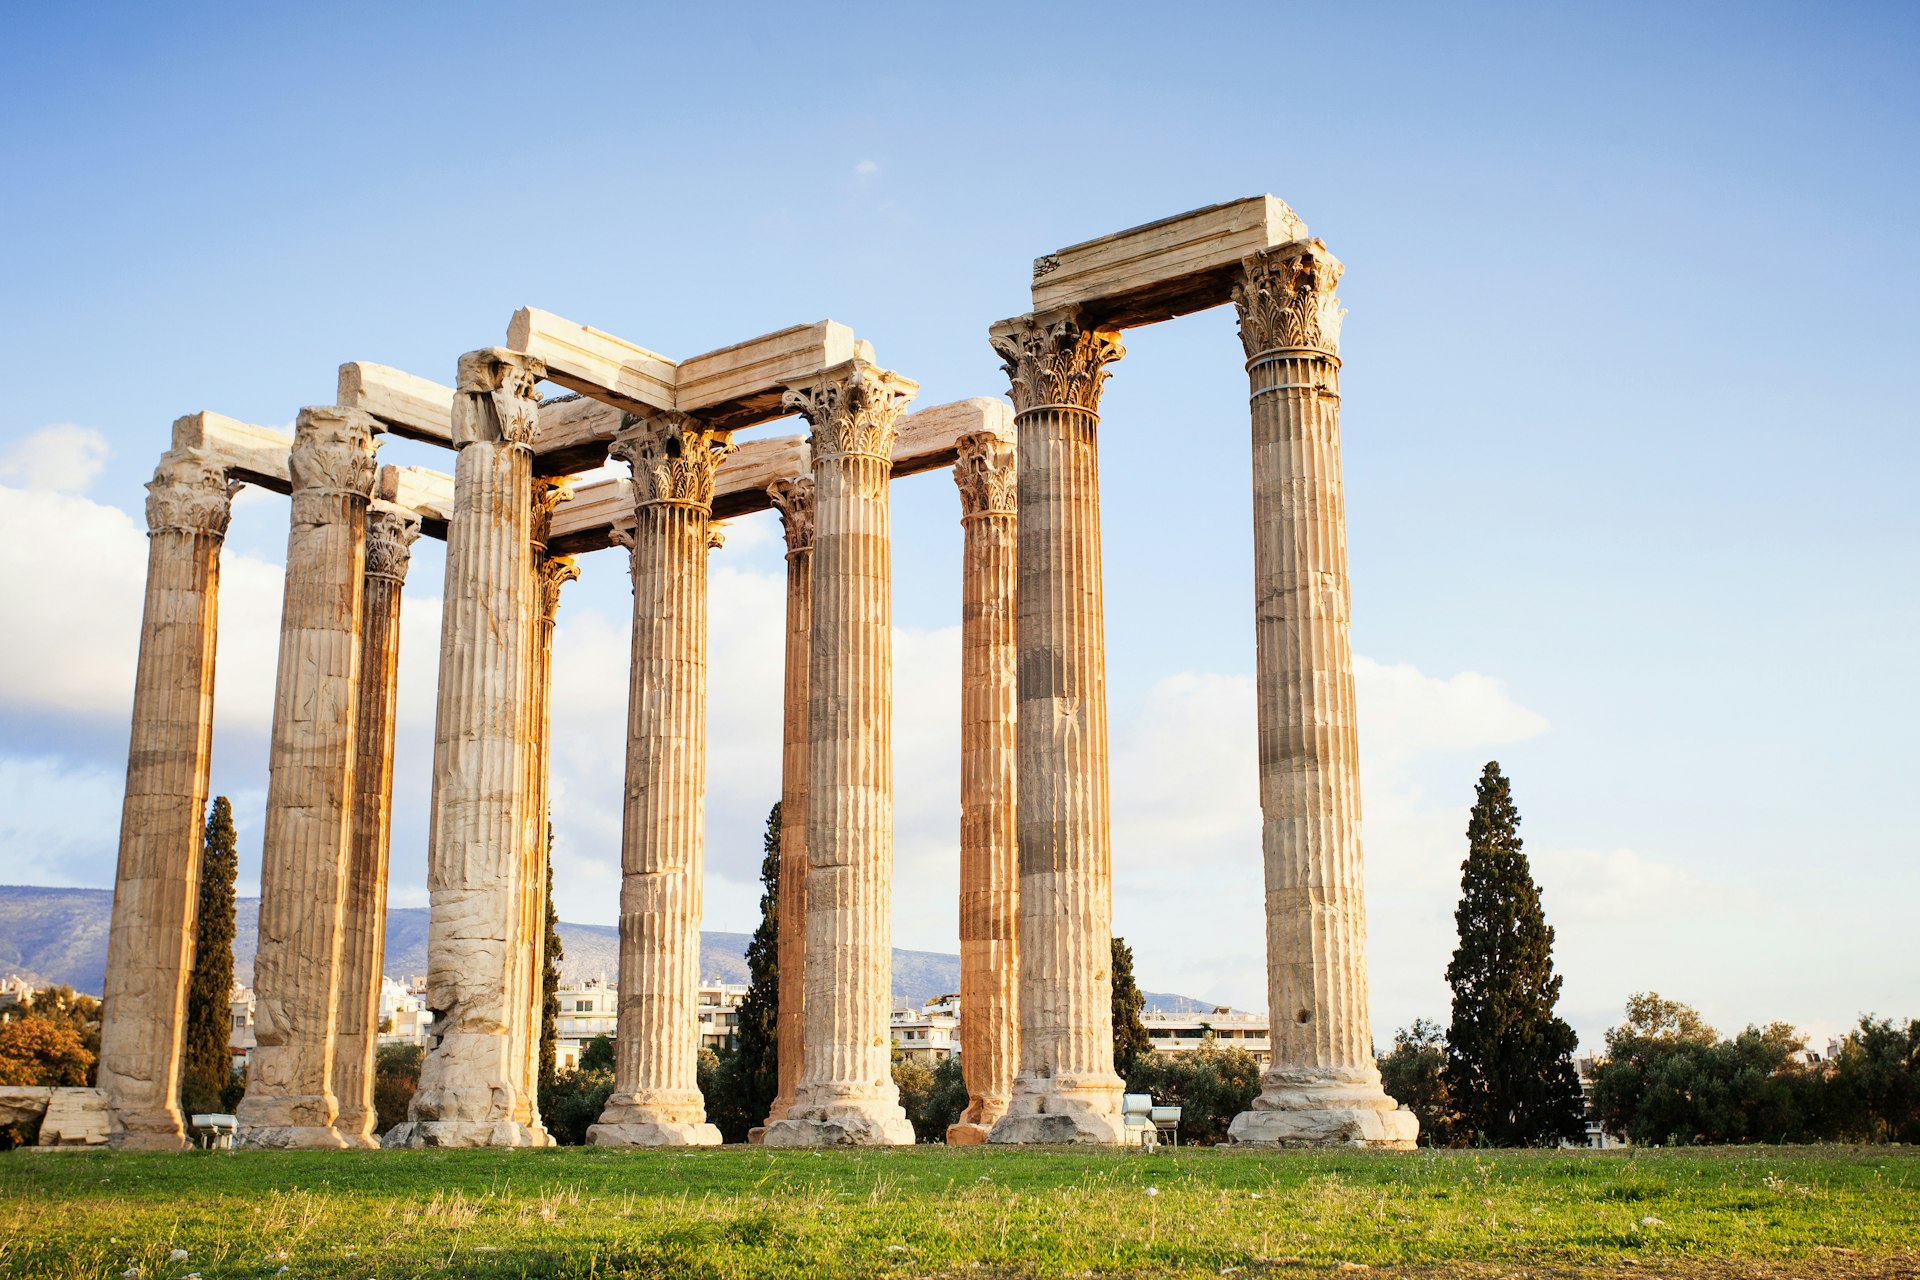 Tall stone columns of the Temple of Olympian Zeus in Athens stand in the sunshine